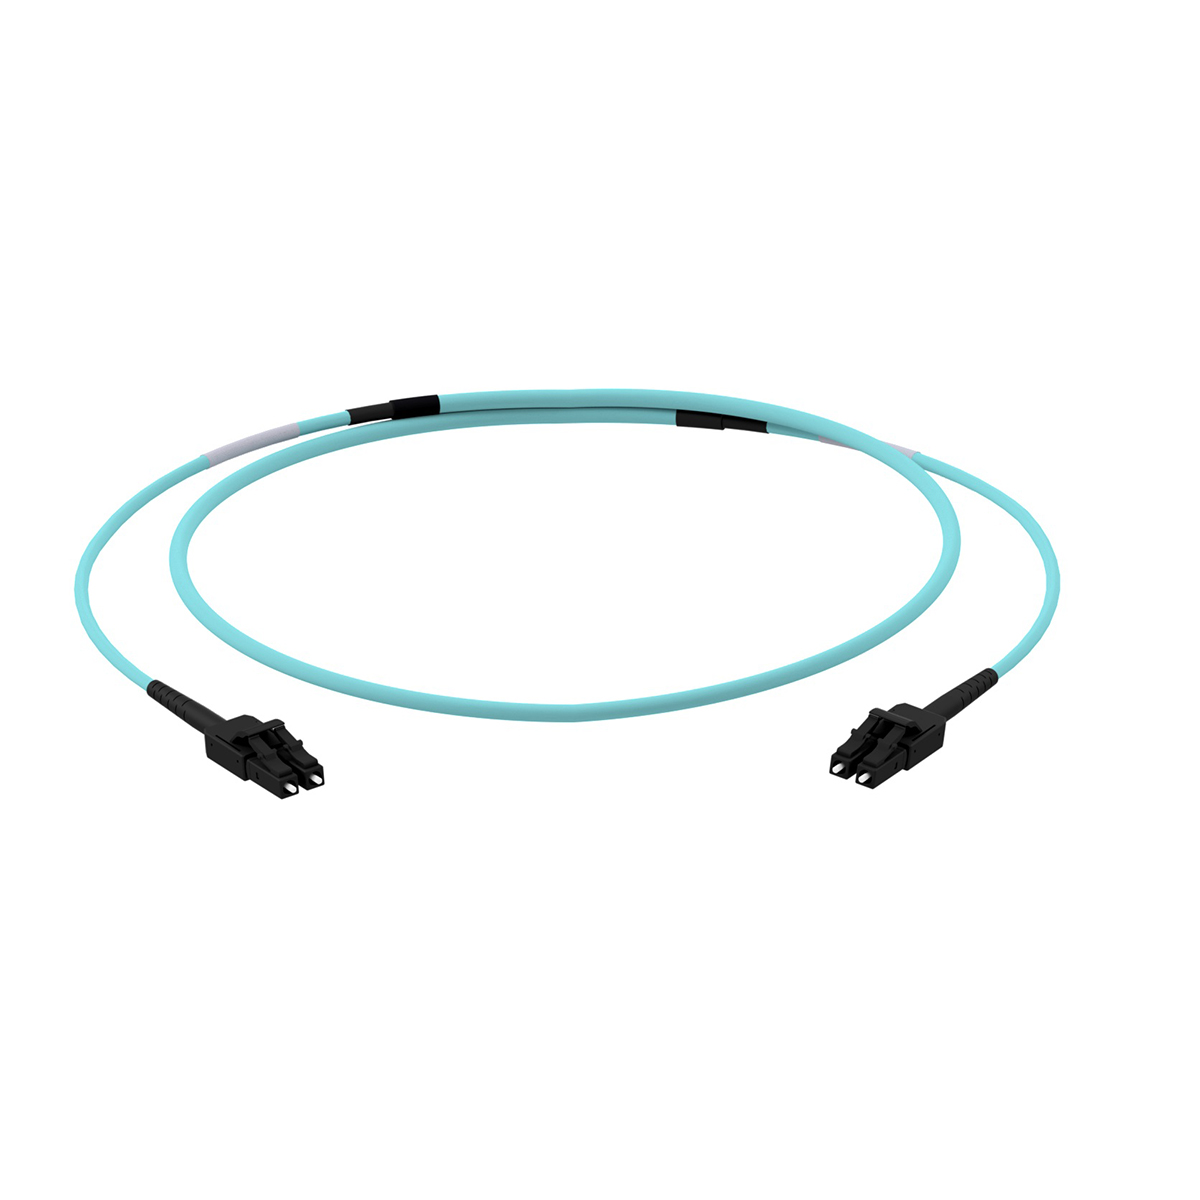 LWL-Patchkabel Duplex Multimode OM3, LC-PC/LC-PC, I-V(ZN)H(ZN)H rund 5,0 mm, mit LC Compact